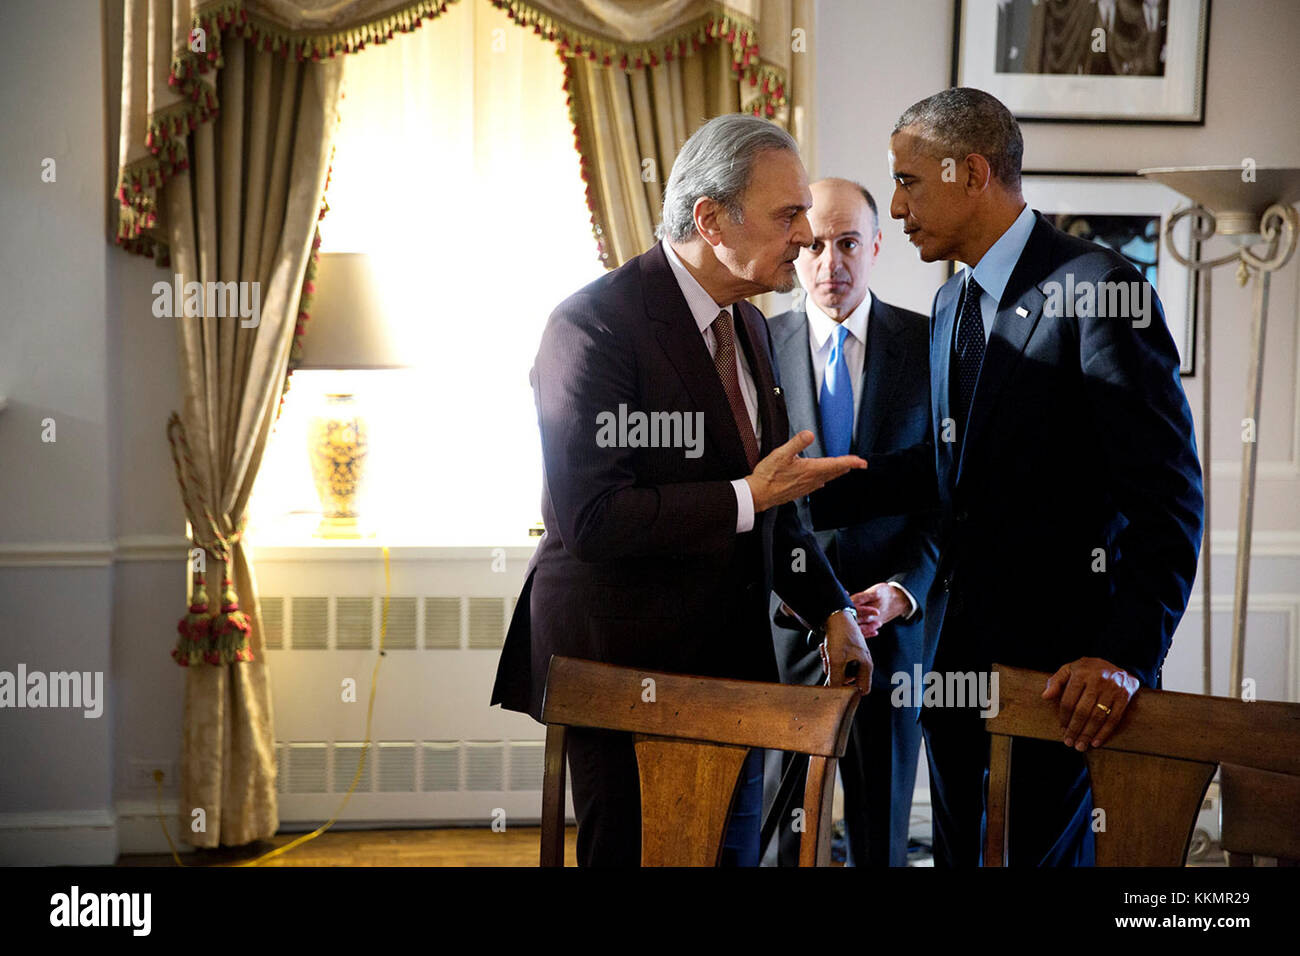 President Barack Obama speaks with Prince Saud Al-Faisal, Foreign Minister of Saudi Arabia following a meeting with Arab coalition leaders in the fight against the terrorist group ISIL in Iraq and Syria, at the Waldorf Astoria Hotel in New York, N.Y., Sept. 23, 2014. Stock Photo